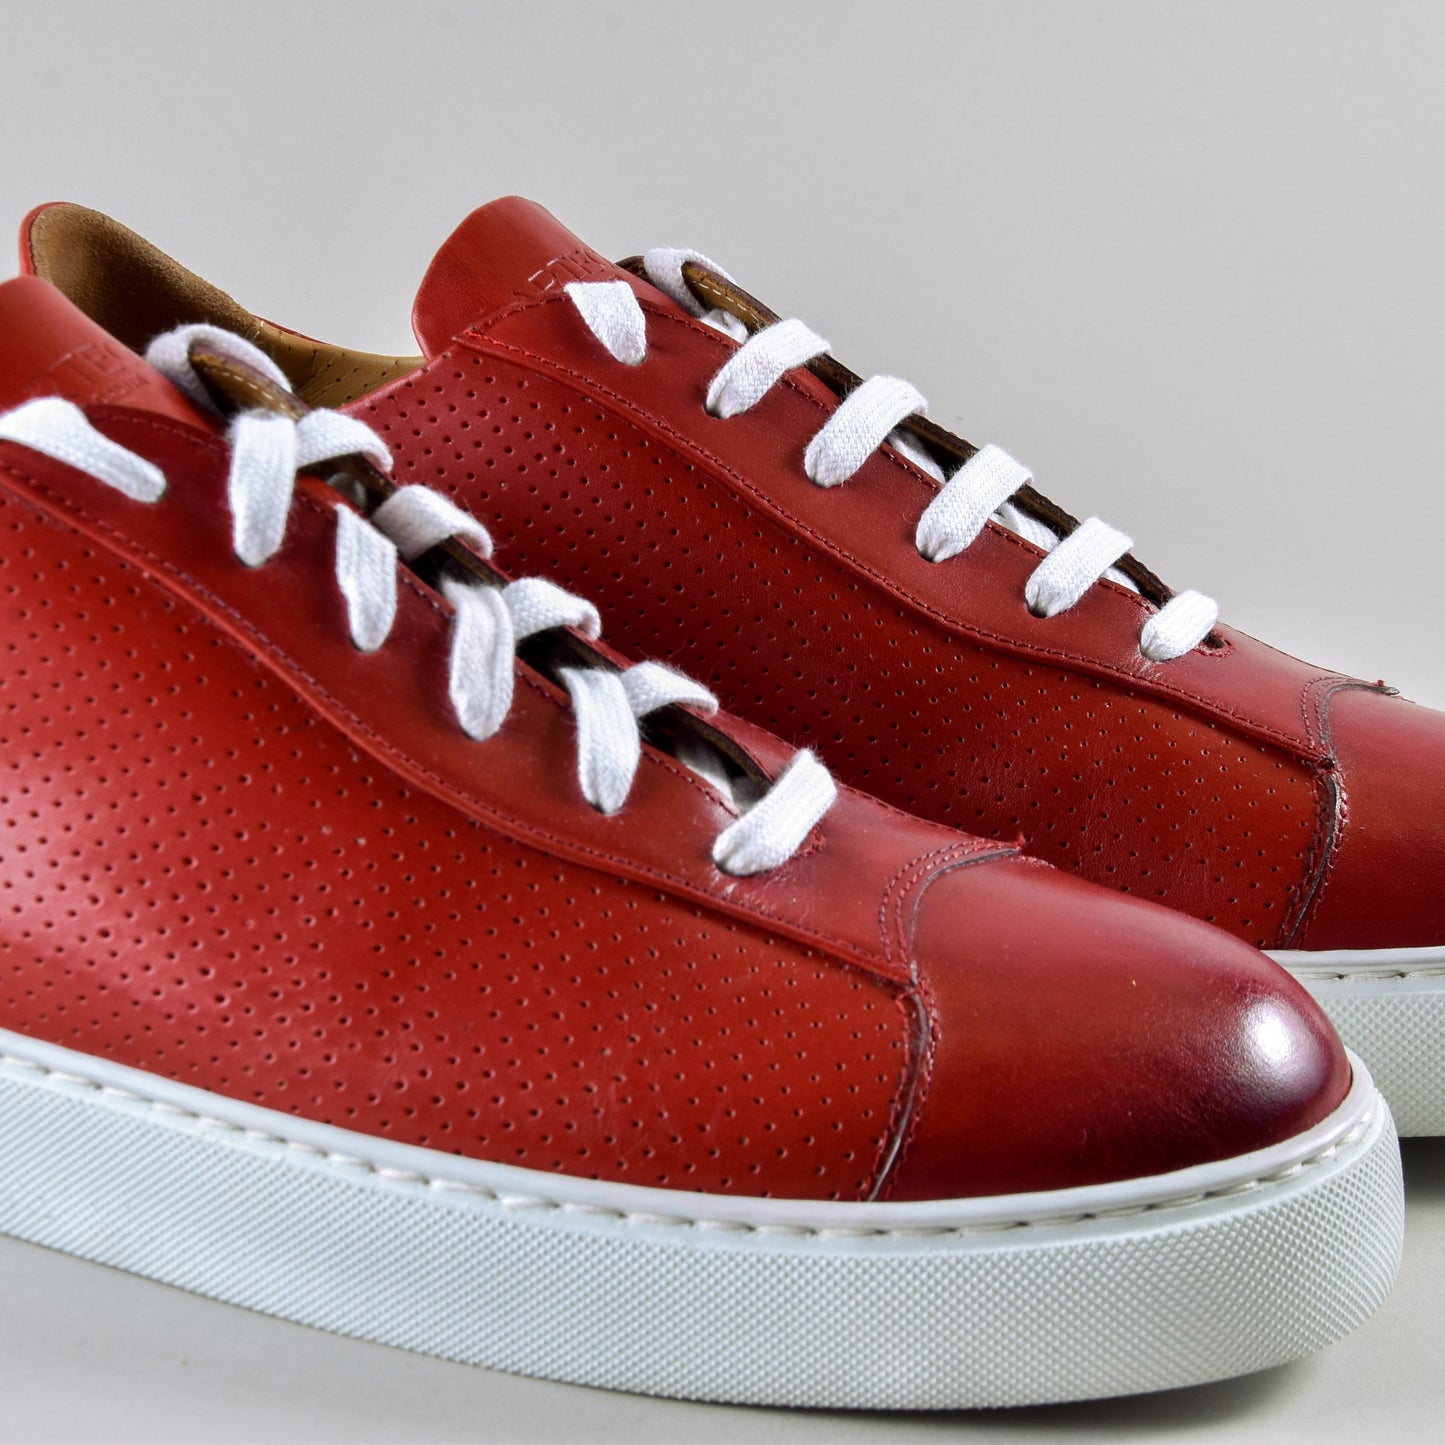 Antique leather sneakers